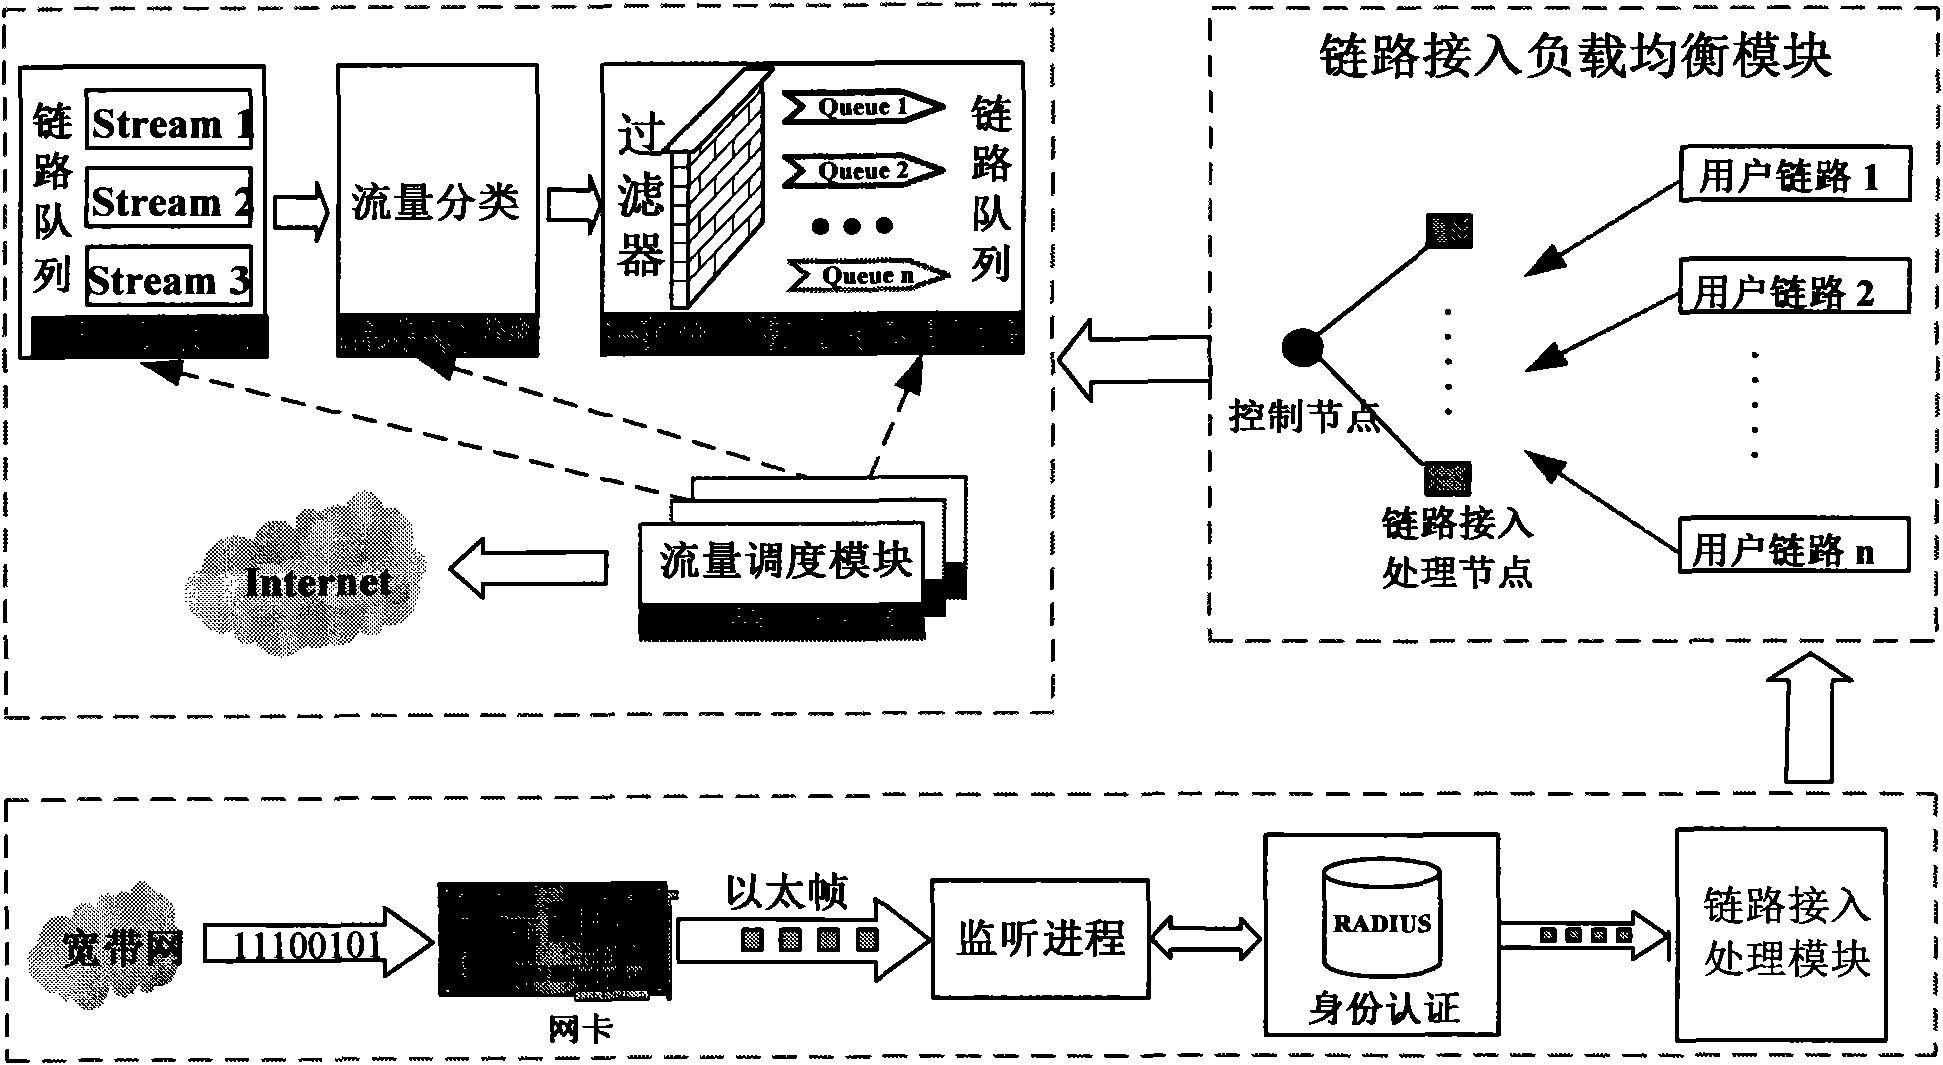 Multilink accessing and flow load dispatching managing method